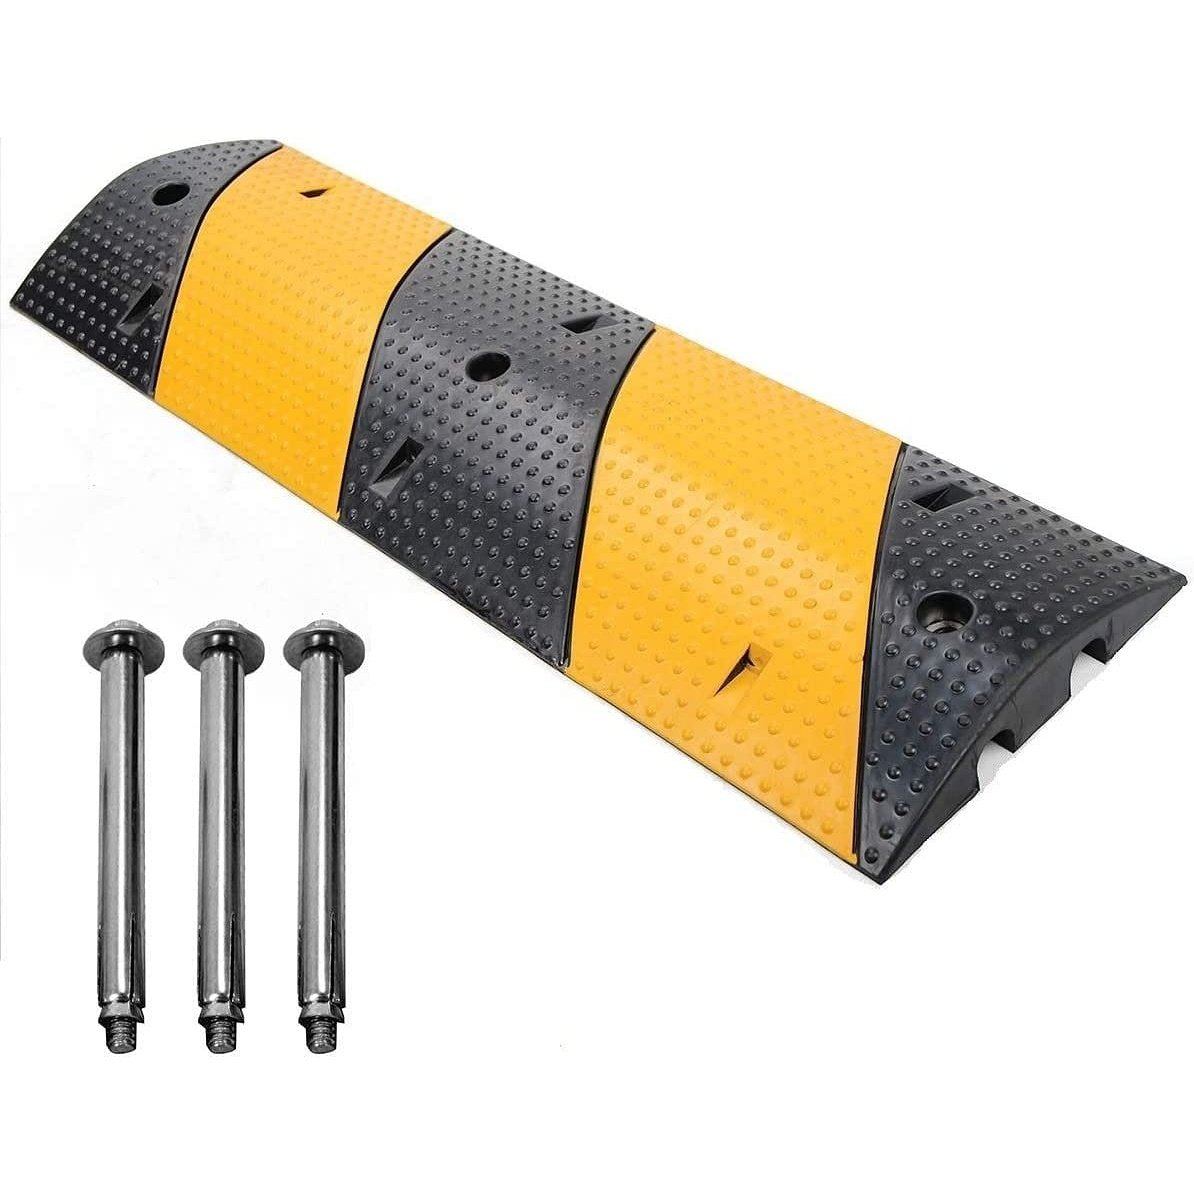 Get a Rubber Speed Bump with Channel Cable Protector on Supply Master Ghana, Accra for Safe Traffic Management | Supply Master | Accra, Ghana Safety Barriers 2 Channels Buy Tools hardware Building materials